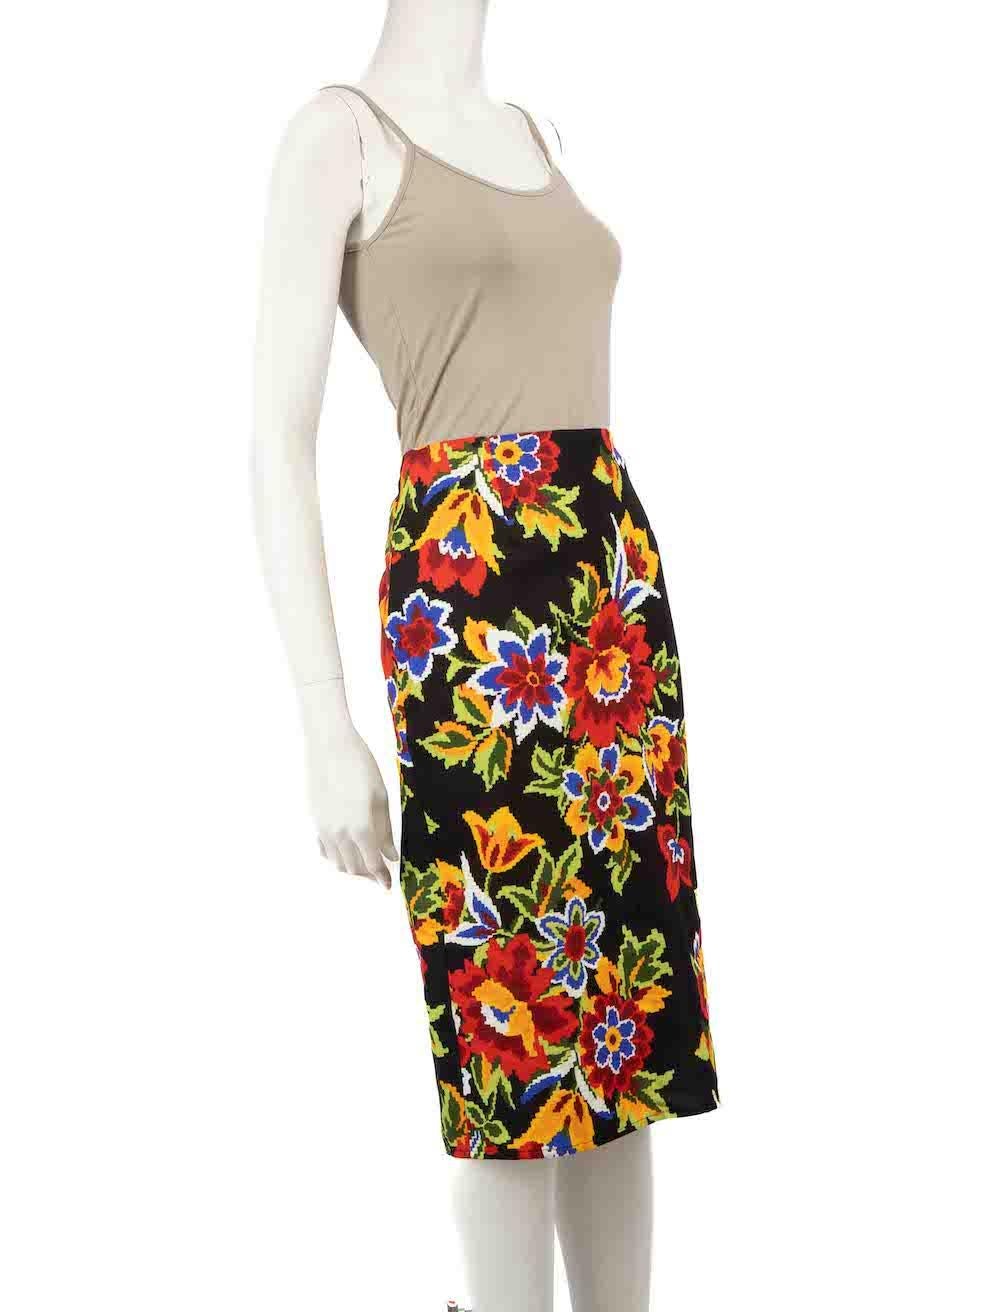 CONDITION is Very good. Hardly any visible wear to skirt is evident on this used Carolina Herrera designer resale item.
 
 
 
 Details
 
 
 Multicolour
 
 Cotton
 
 Pencil skirt
 
 Knee length
 
 Pixel flower pattern
 
 Back zip closure with snap